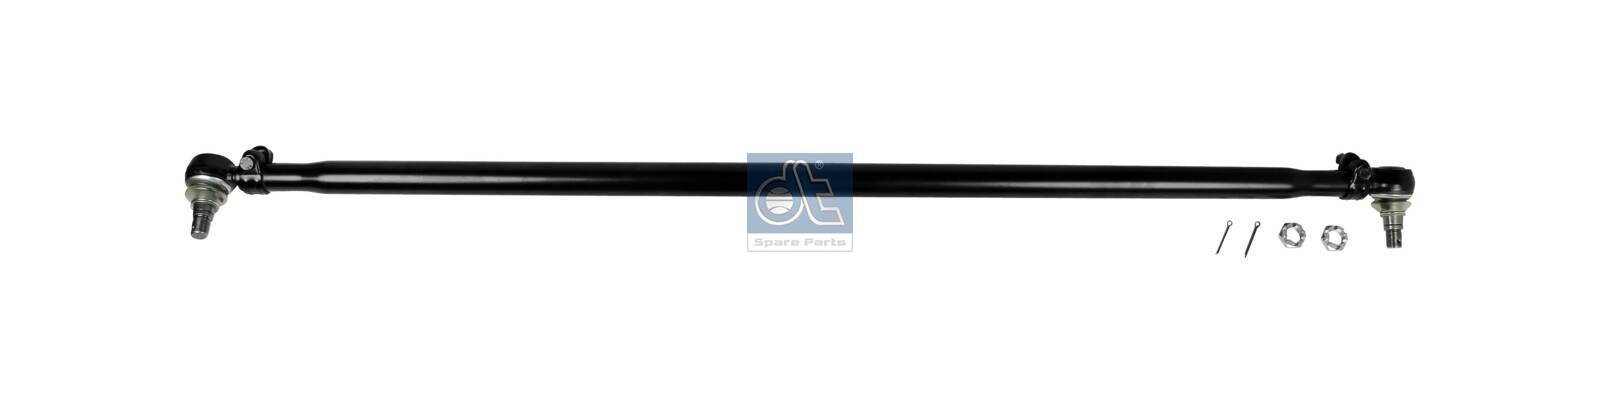 DT Spare Parts 6.53015 Rod Assembly 50 01 860 359